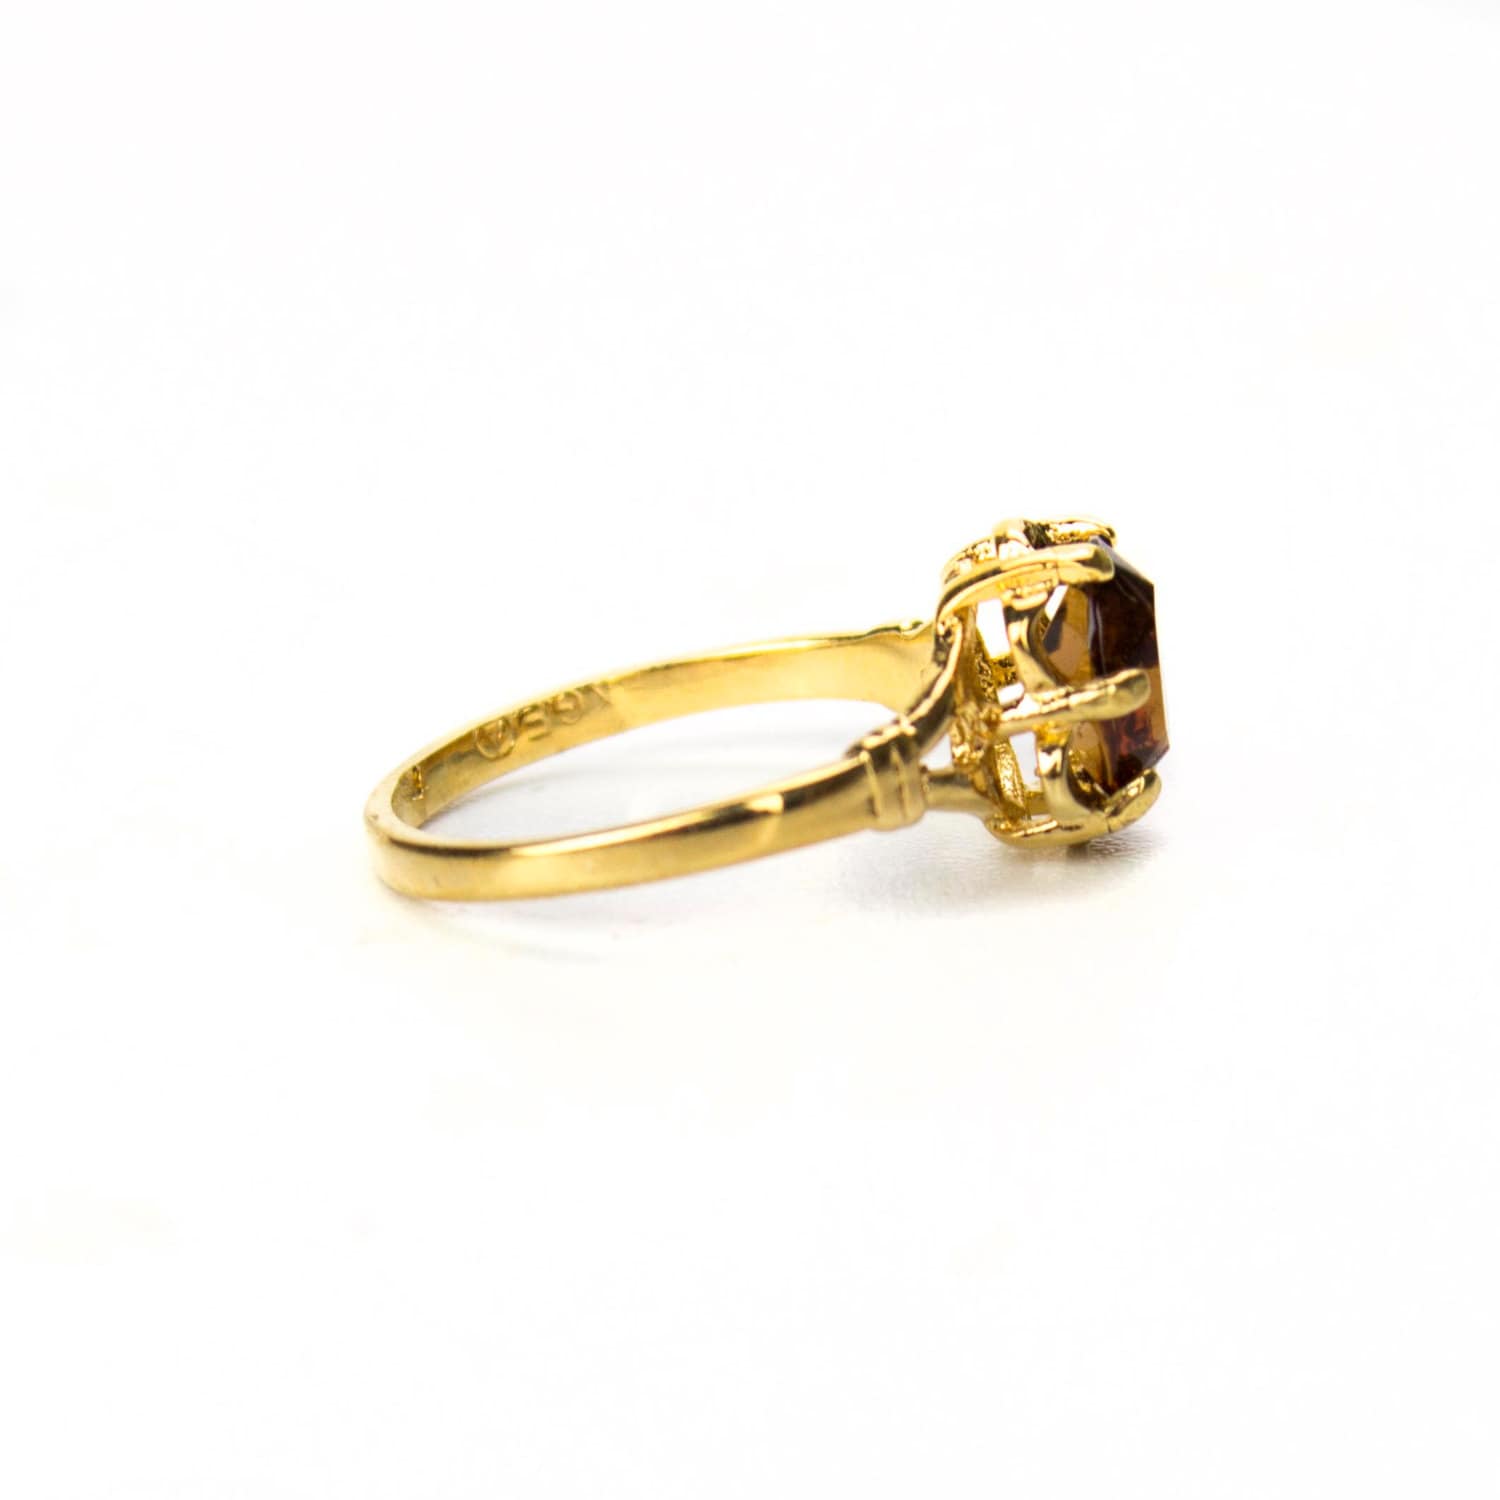 Vintage Women's Ring 1970s Solitaire Ring 18k Gold Electroplated